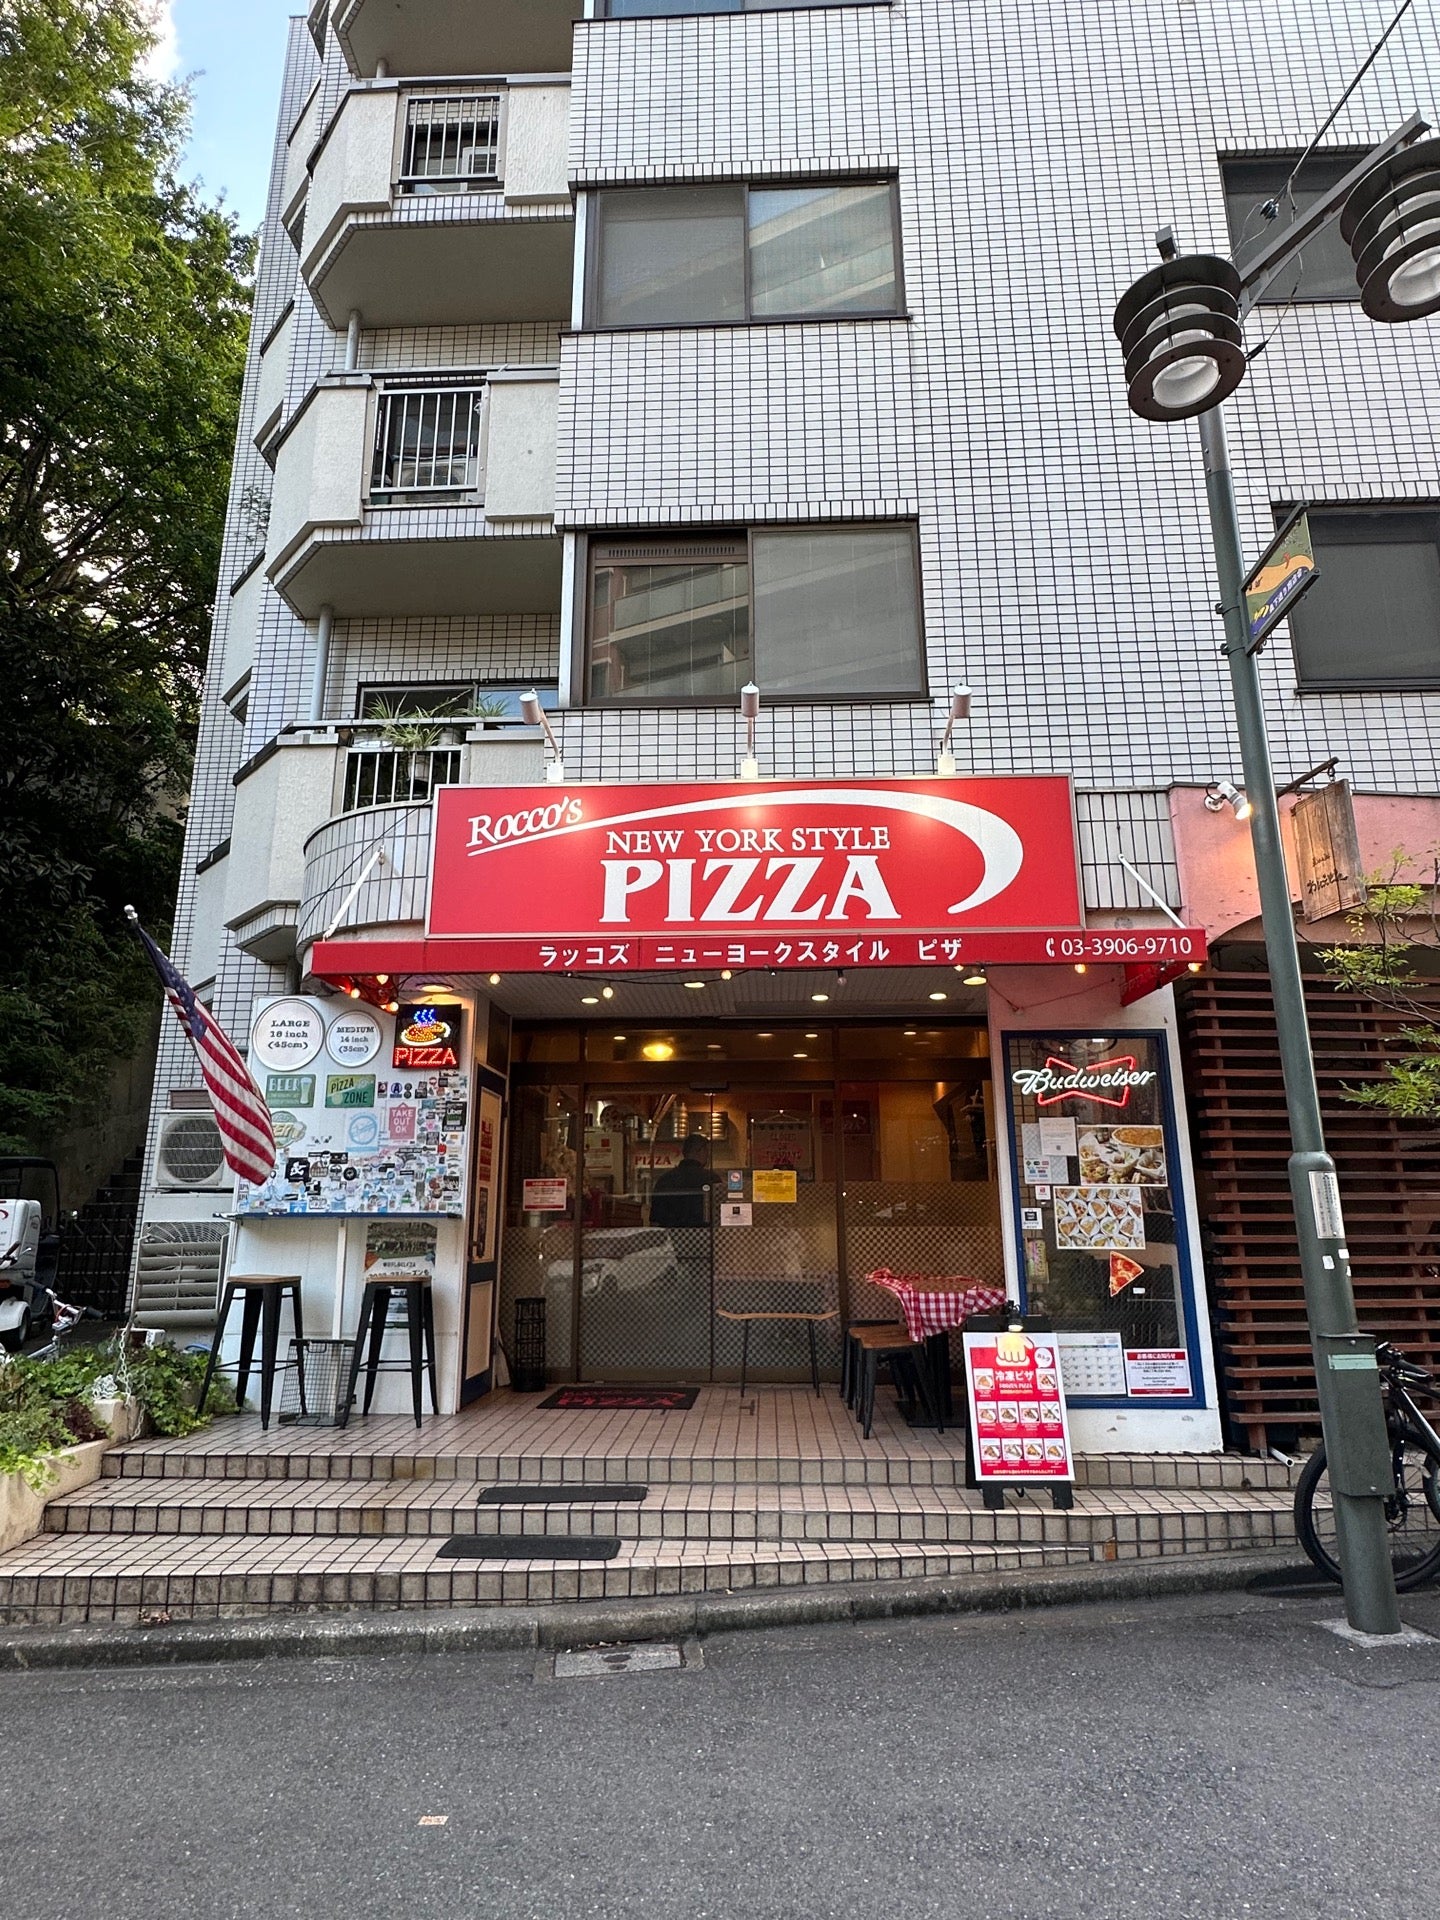 Rocco's New York Style Pizza (ラッコズ ニューヨークスタイルピザ)